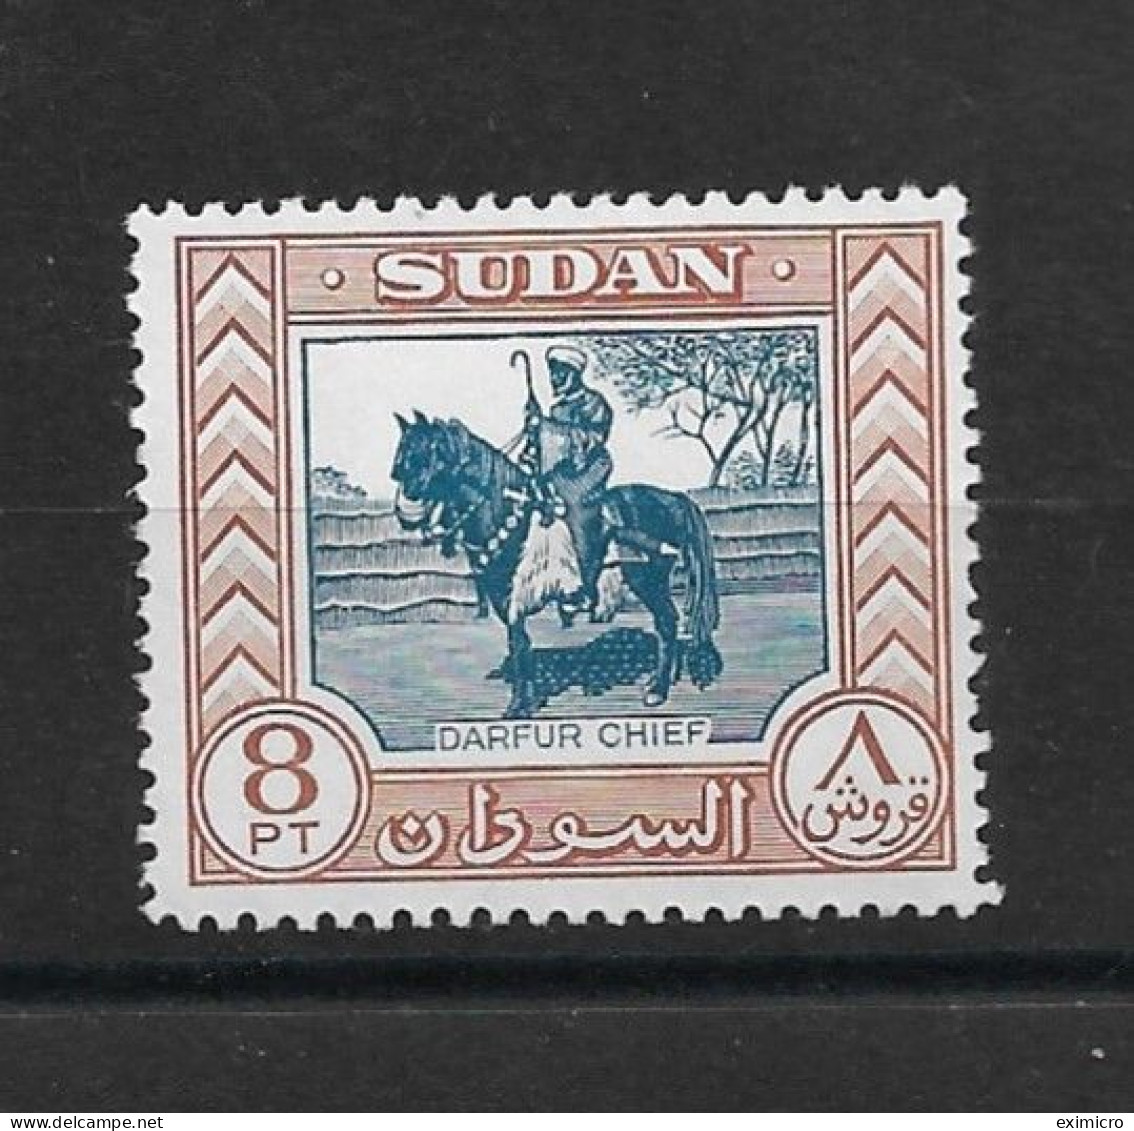 SUDAN 1951 - 1961 8p  SG 136a DEEP BLUE AND BROWN  UNMOUNTED MINT Cat £21 - Sudan (...-1951)